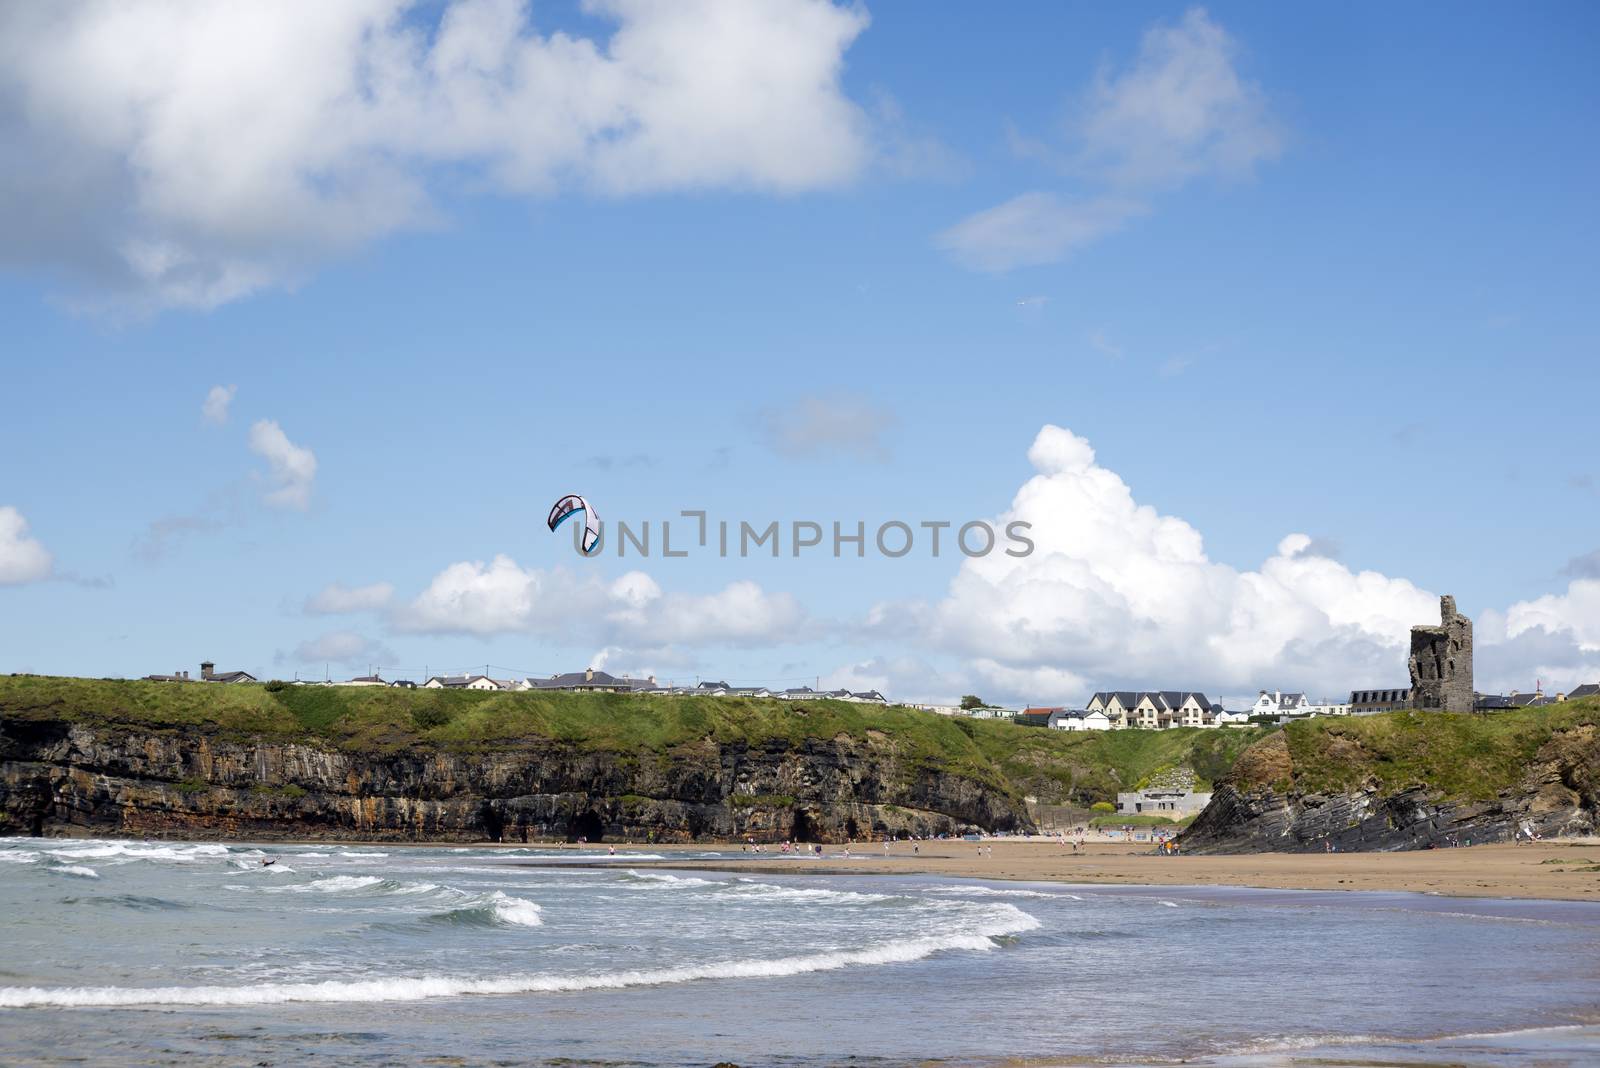 lone kite surfer surfing at ballybunion beach by morrbyte